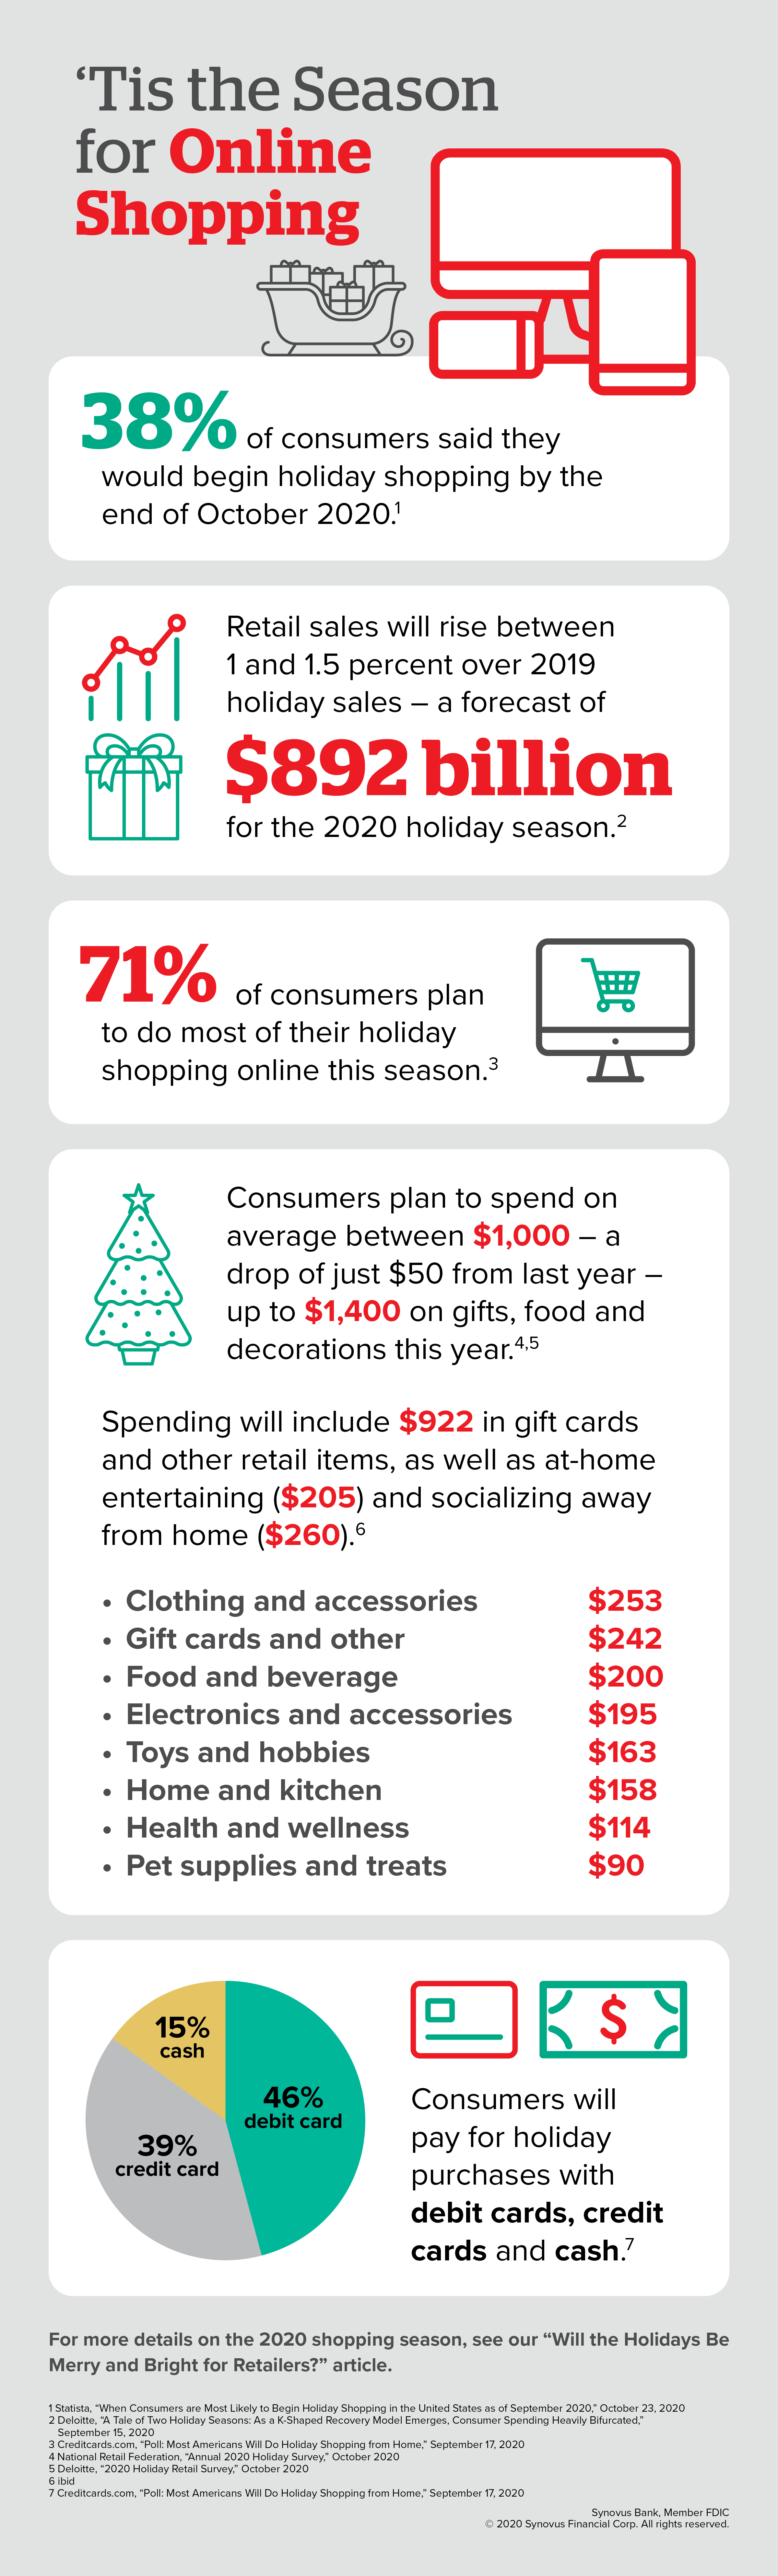 Infographic describing online holiday shopping. A full description of the infographic is available through a link beneath the image.